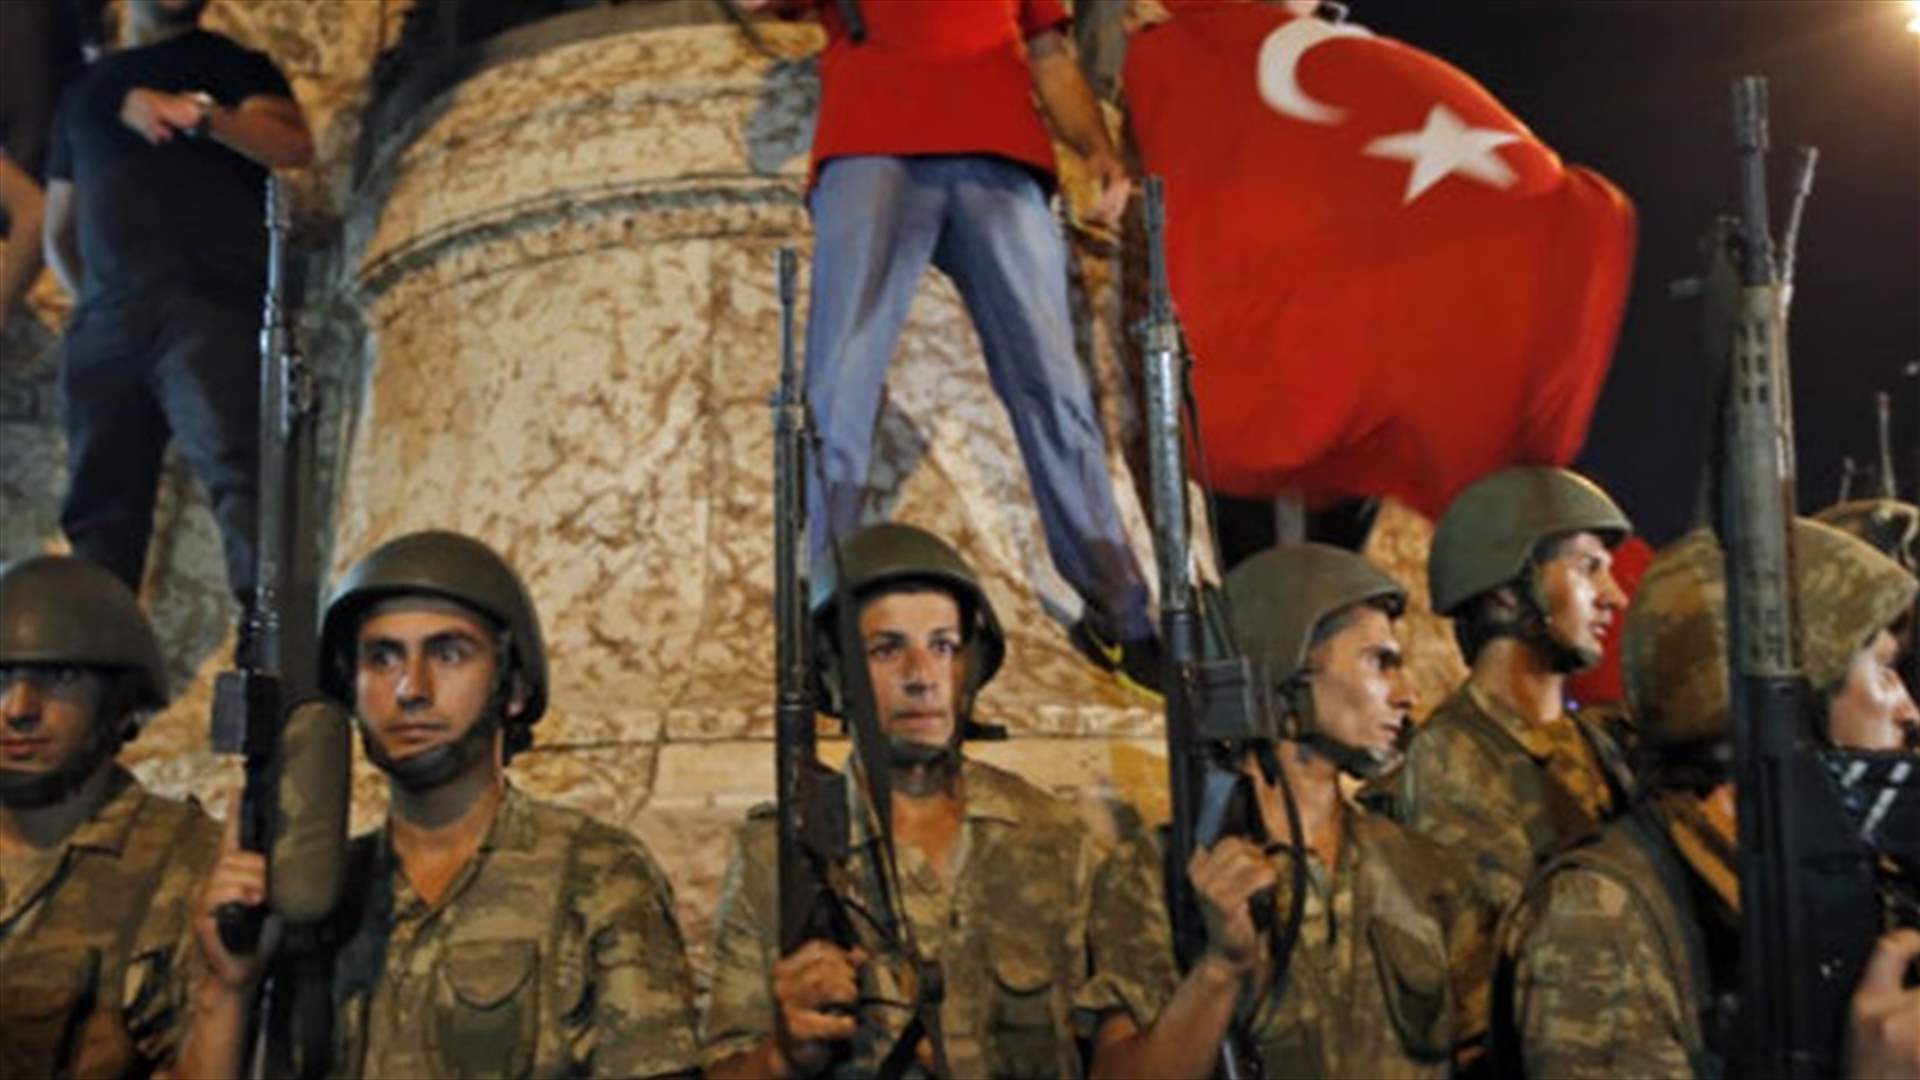 Turkey detains more journalists in coup round-up - report